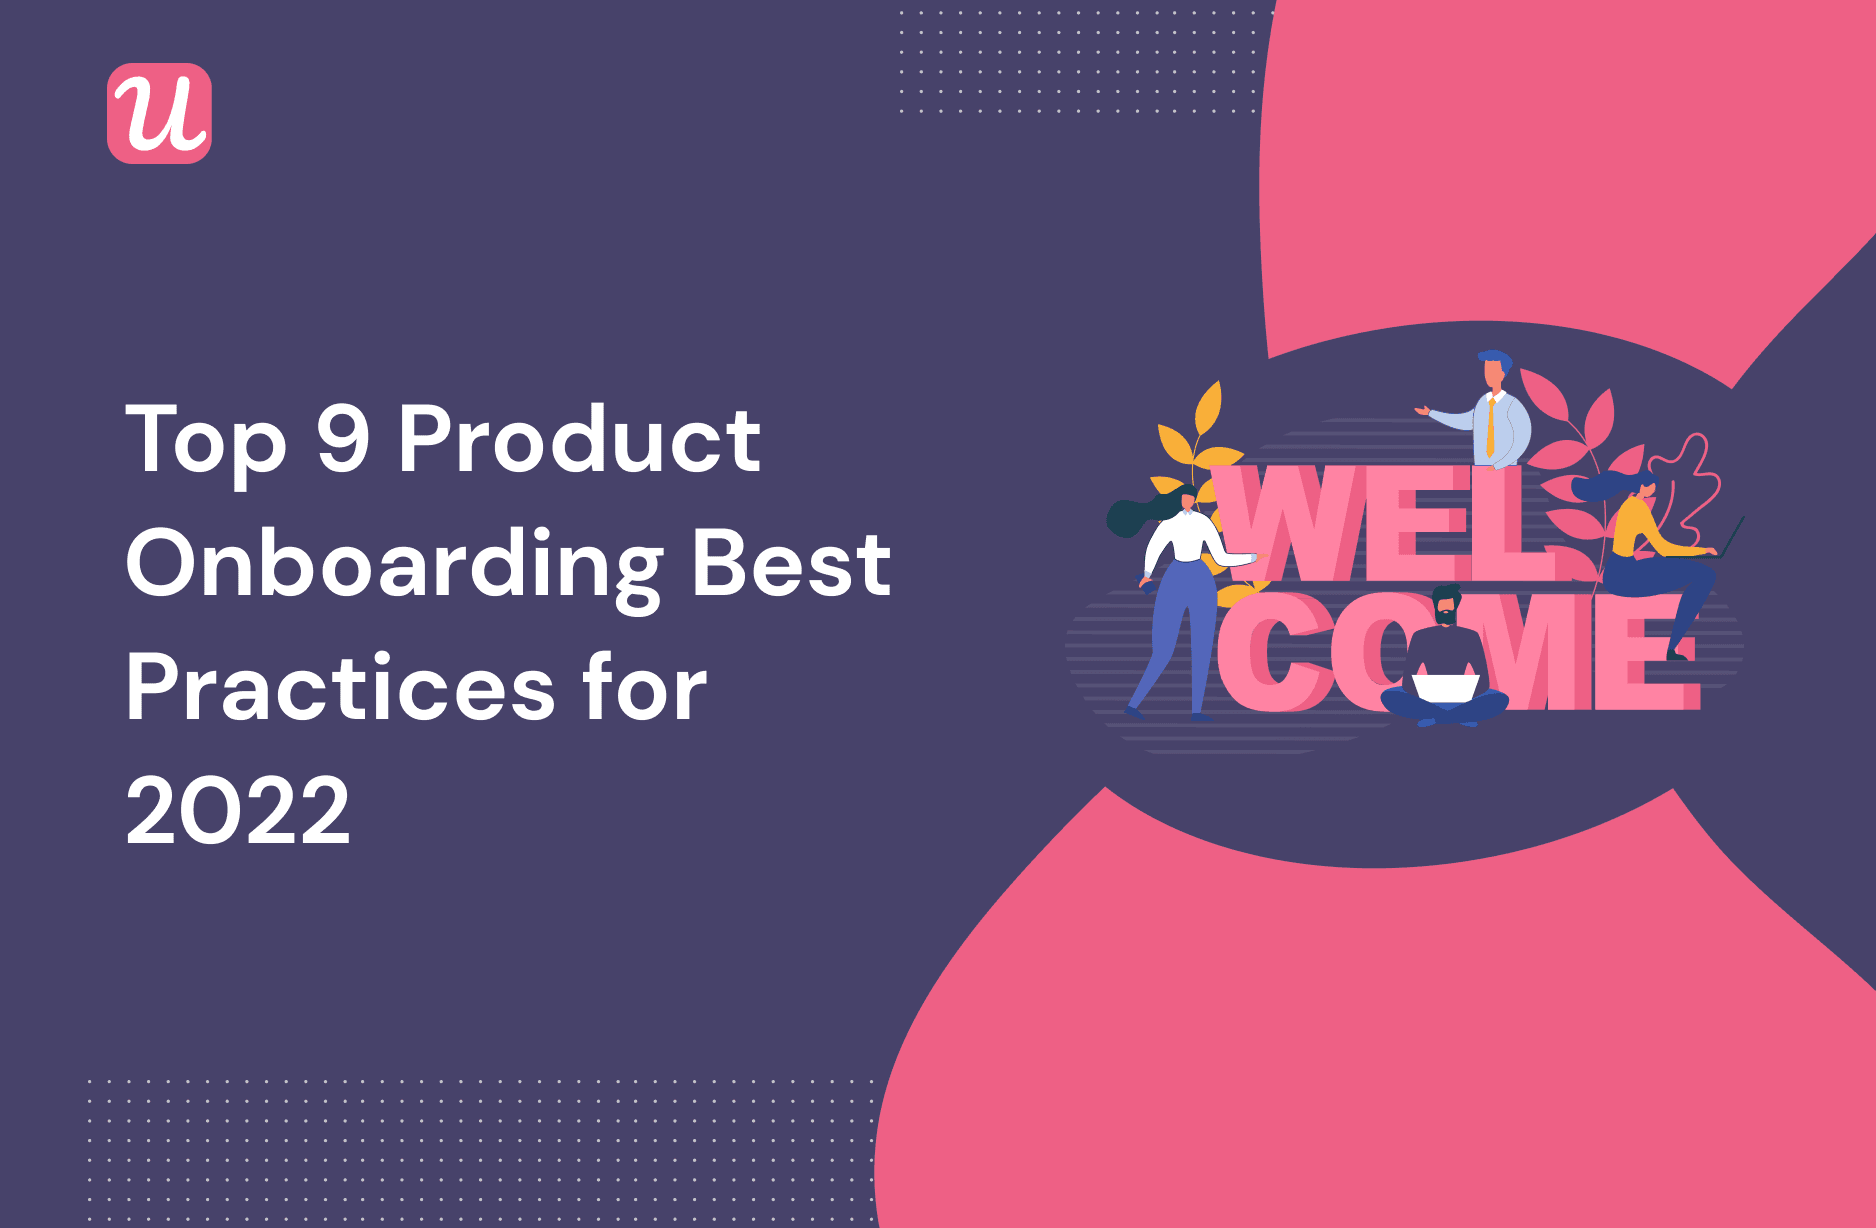 Top 9 Product Onboarding Best Practices for 2022